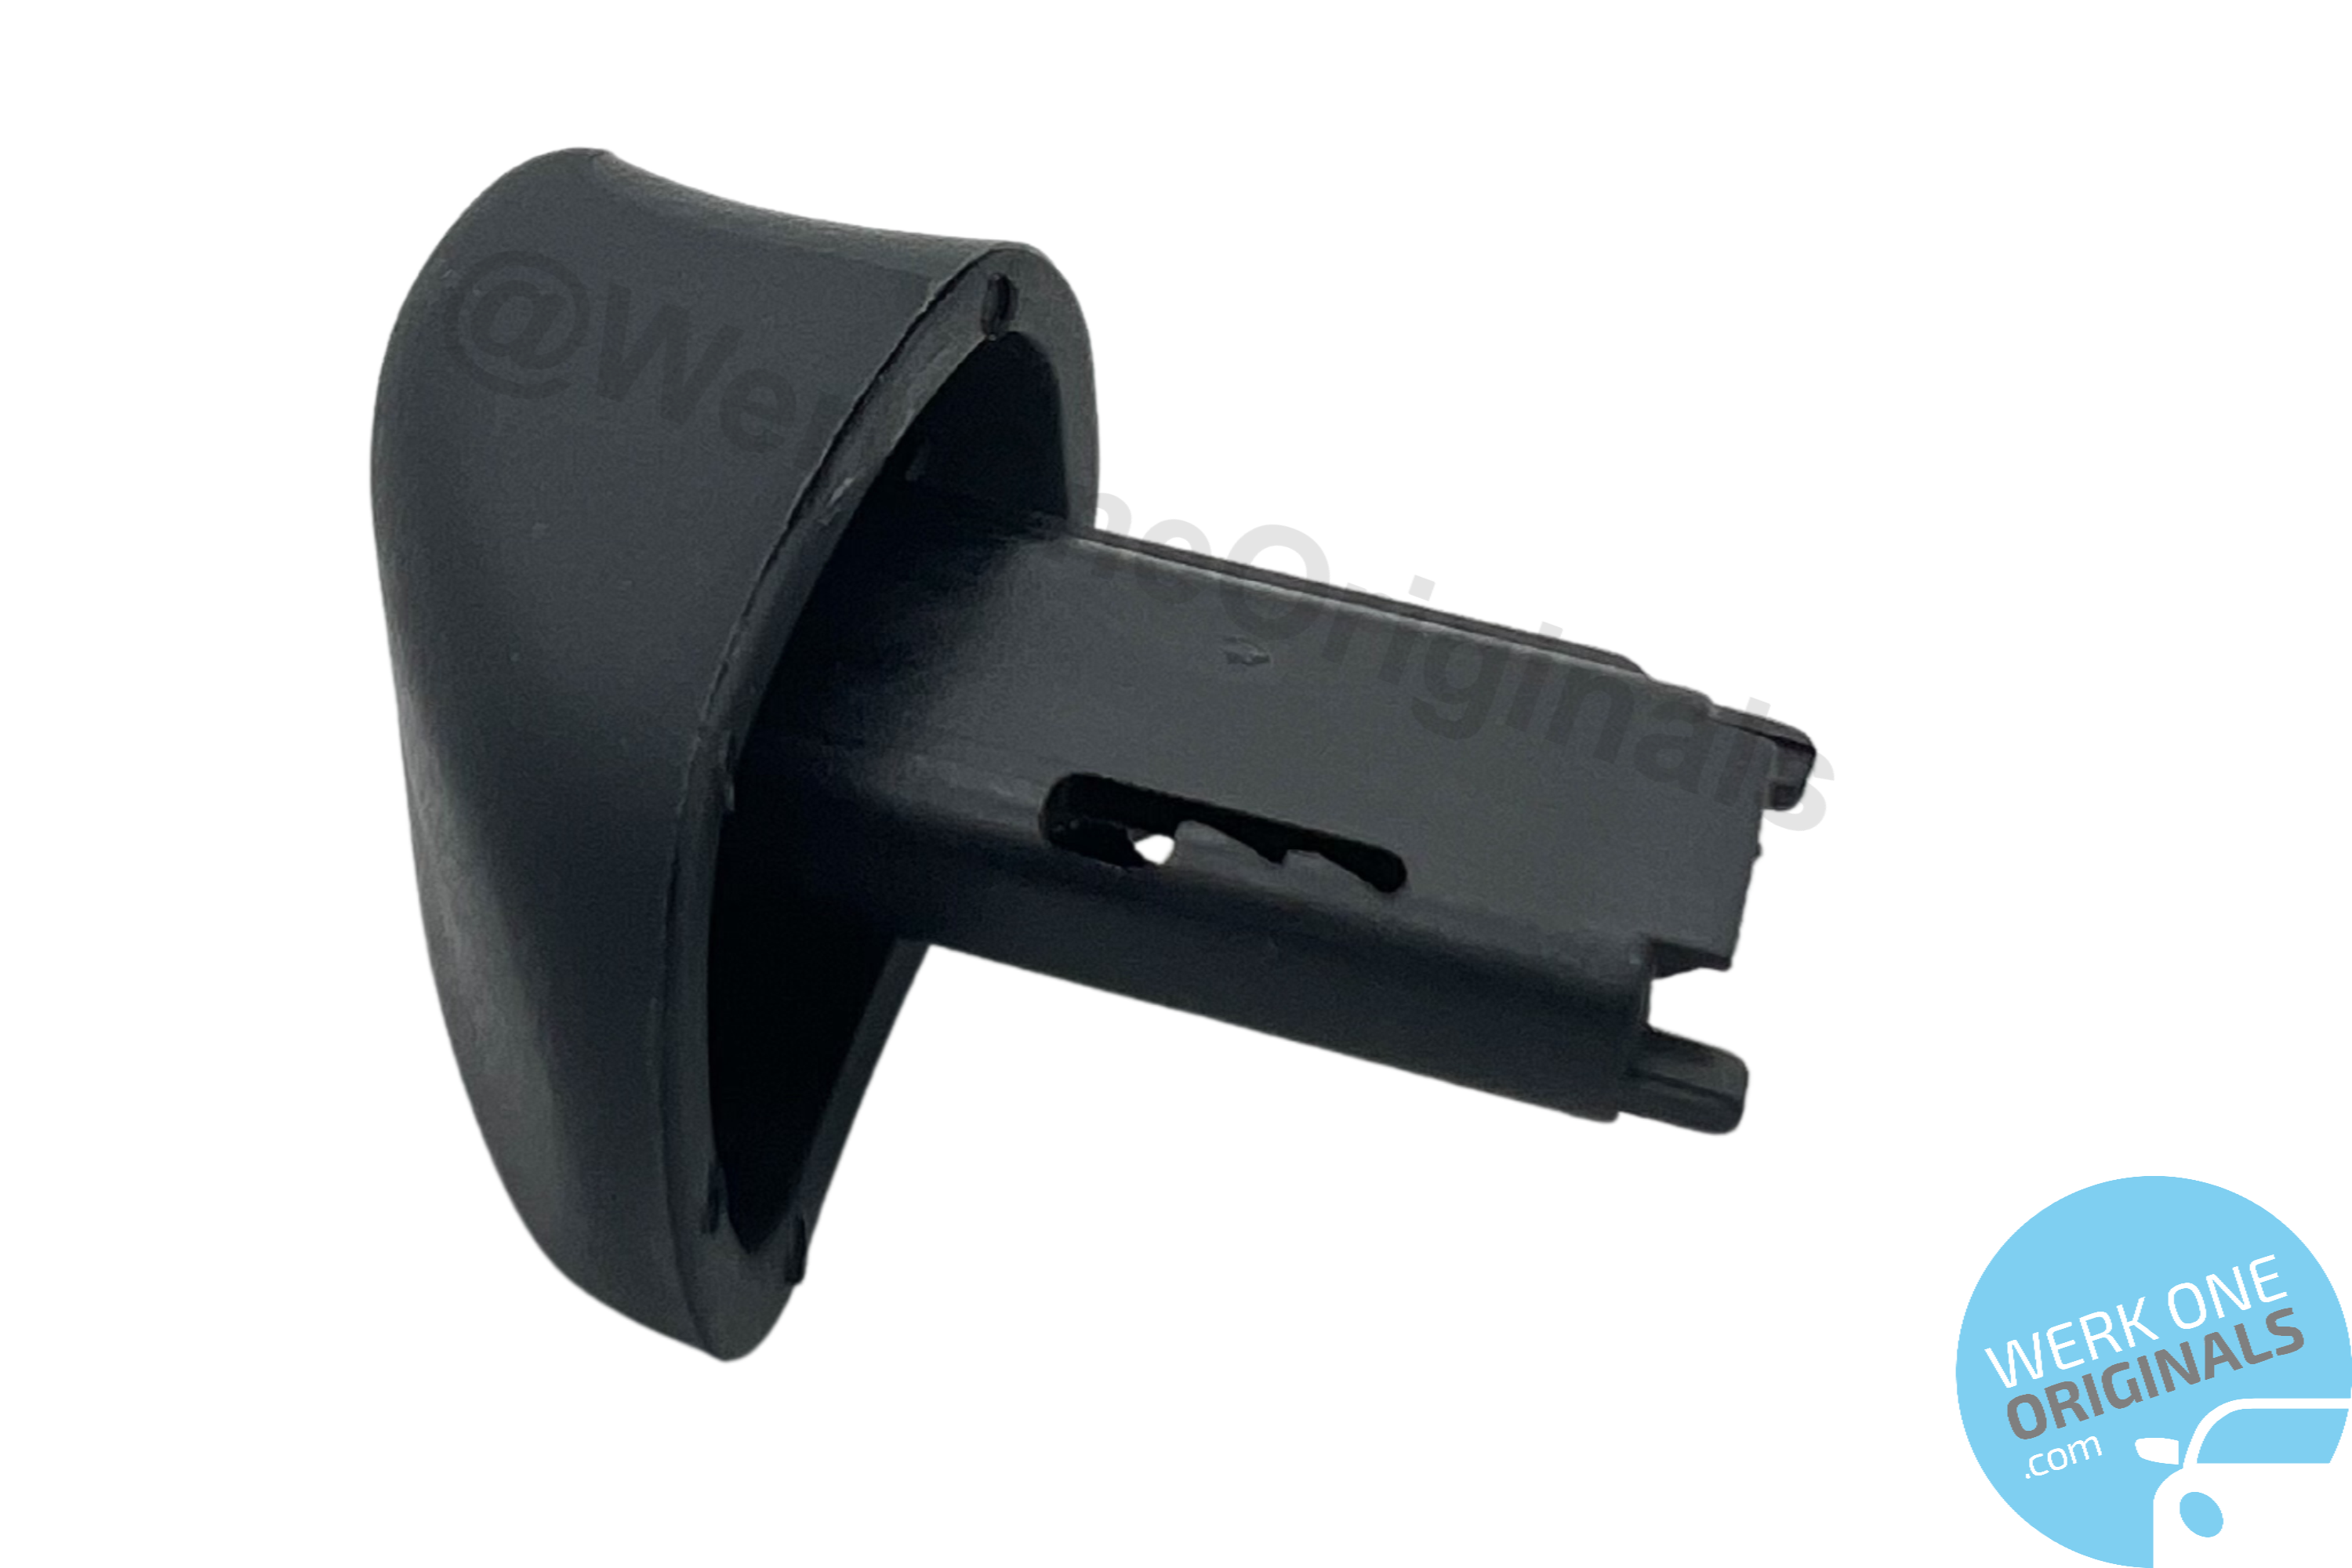 Porsche LH Seat Release Handle for Boxster Type 986 Models